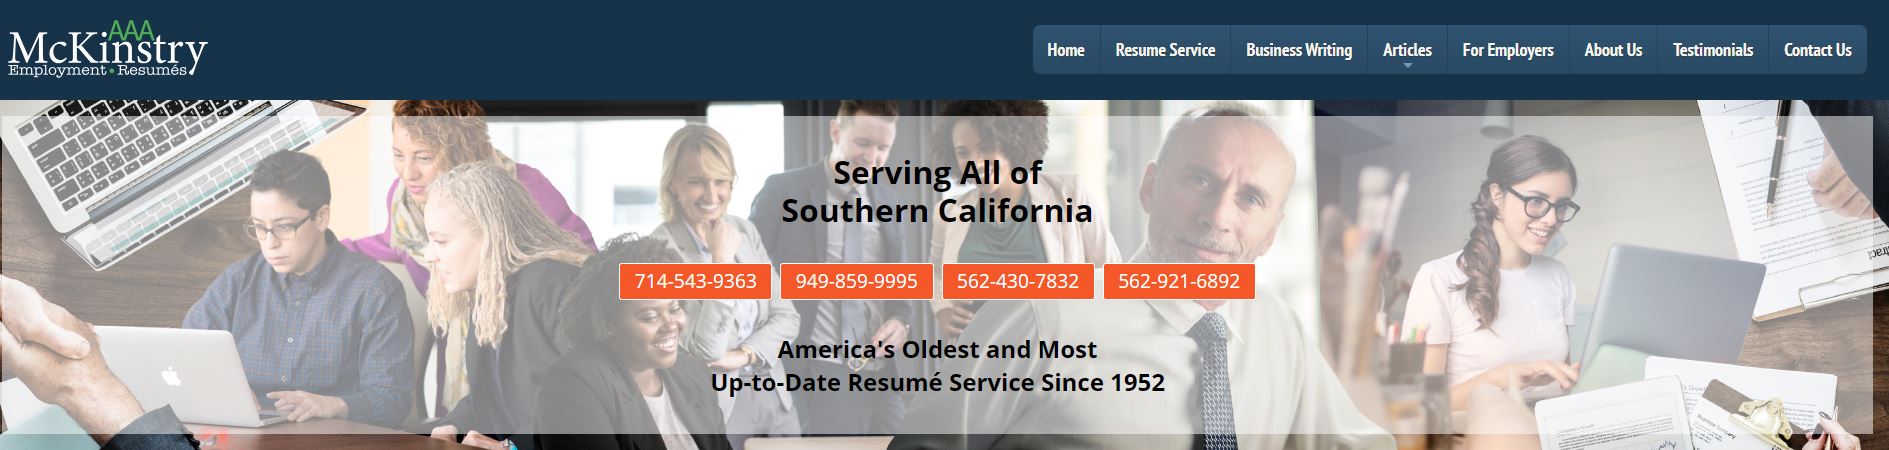 Best Resume Service in California - Screenshot of AAA McKinstry Personnel Agency & Resume Services Homepage